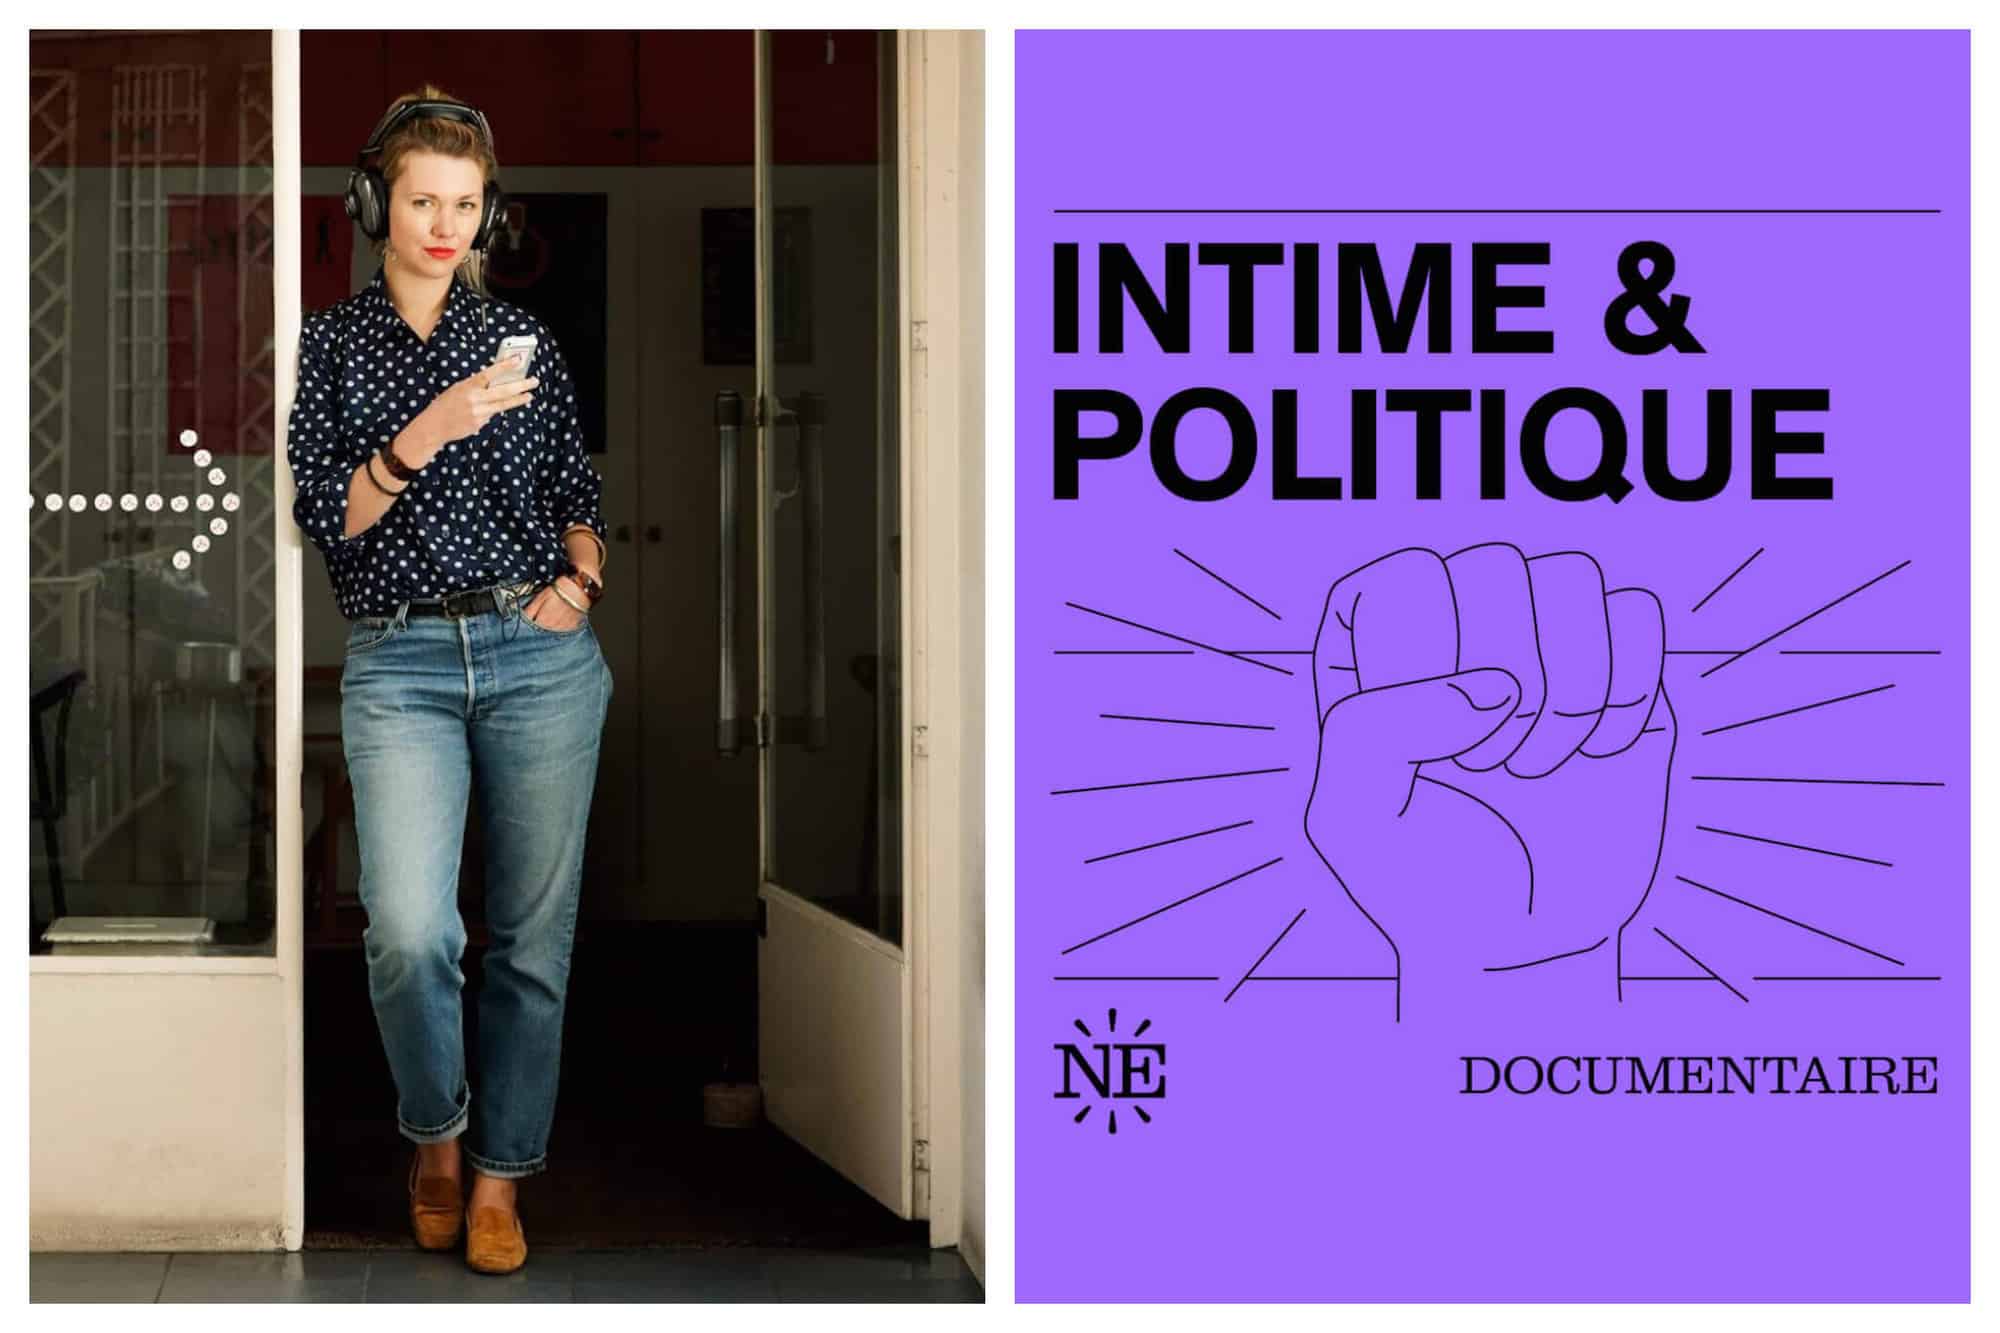 Left: Lauren Bastide, host of La Poudre podcast, stands in a doorway, looking at the camera. She has a pair of headphones on her head, her right hand holding her phone and her left hand in her pocket, Right: Cover of the Intime & Politique podcast, with the title in bold type and an illustration of a fist. 